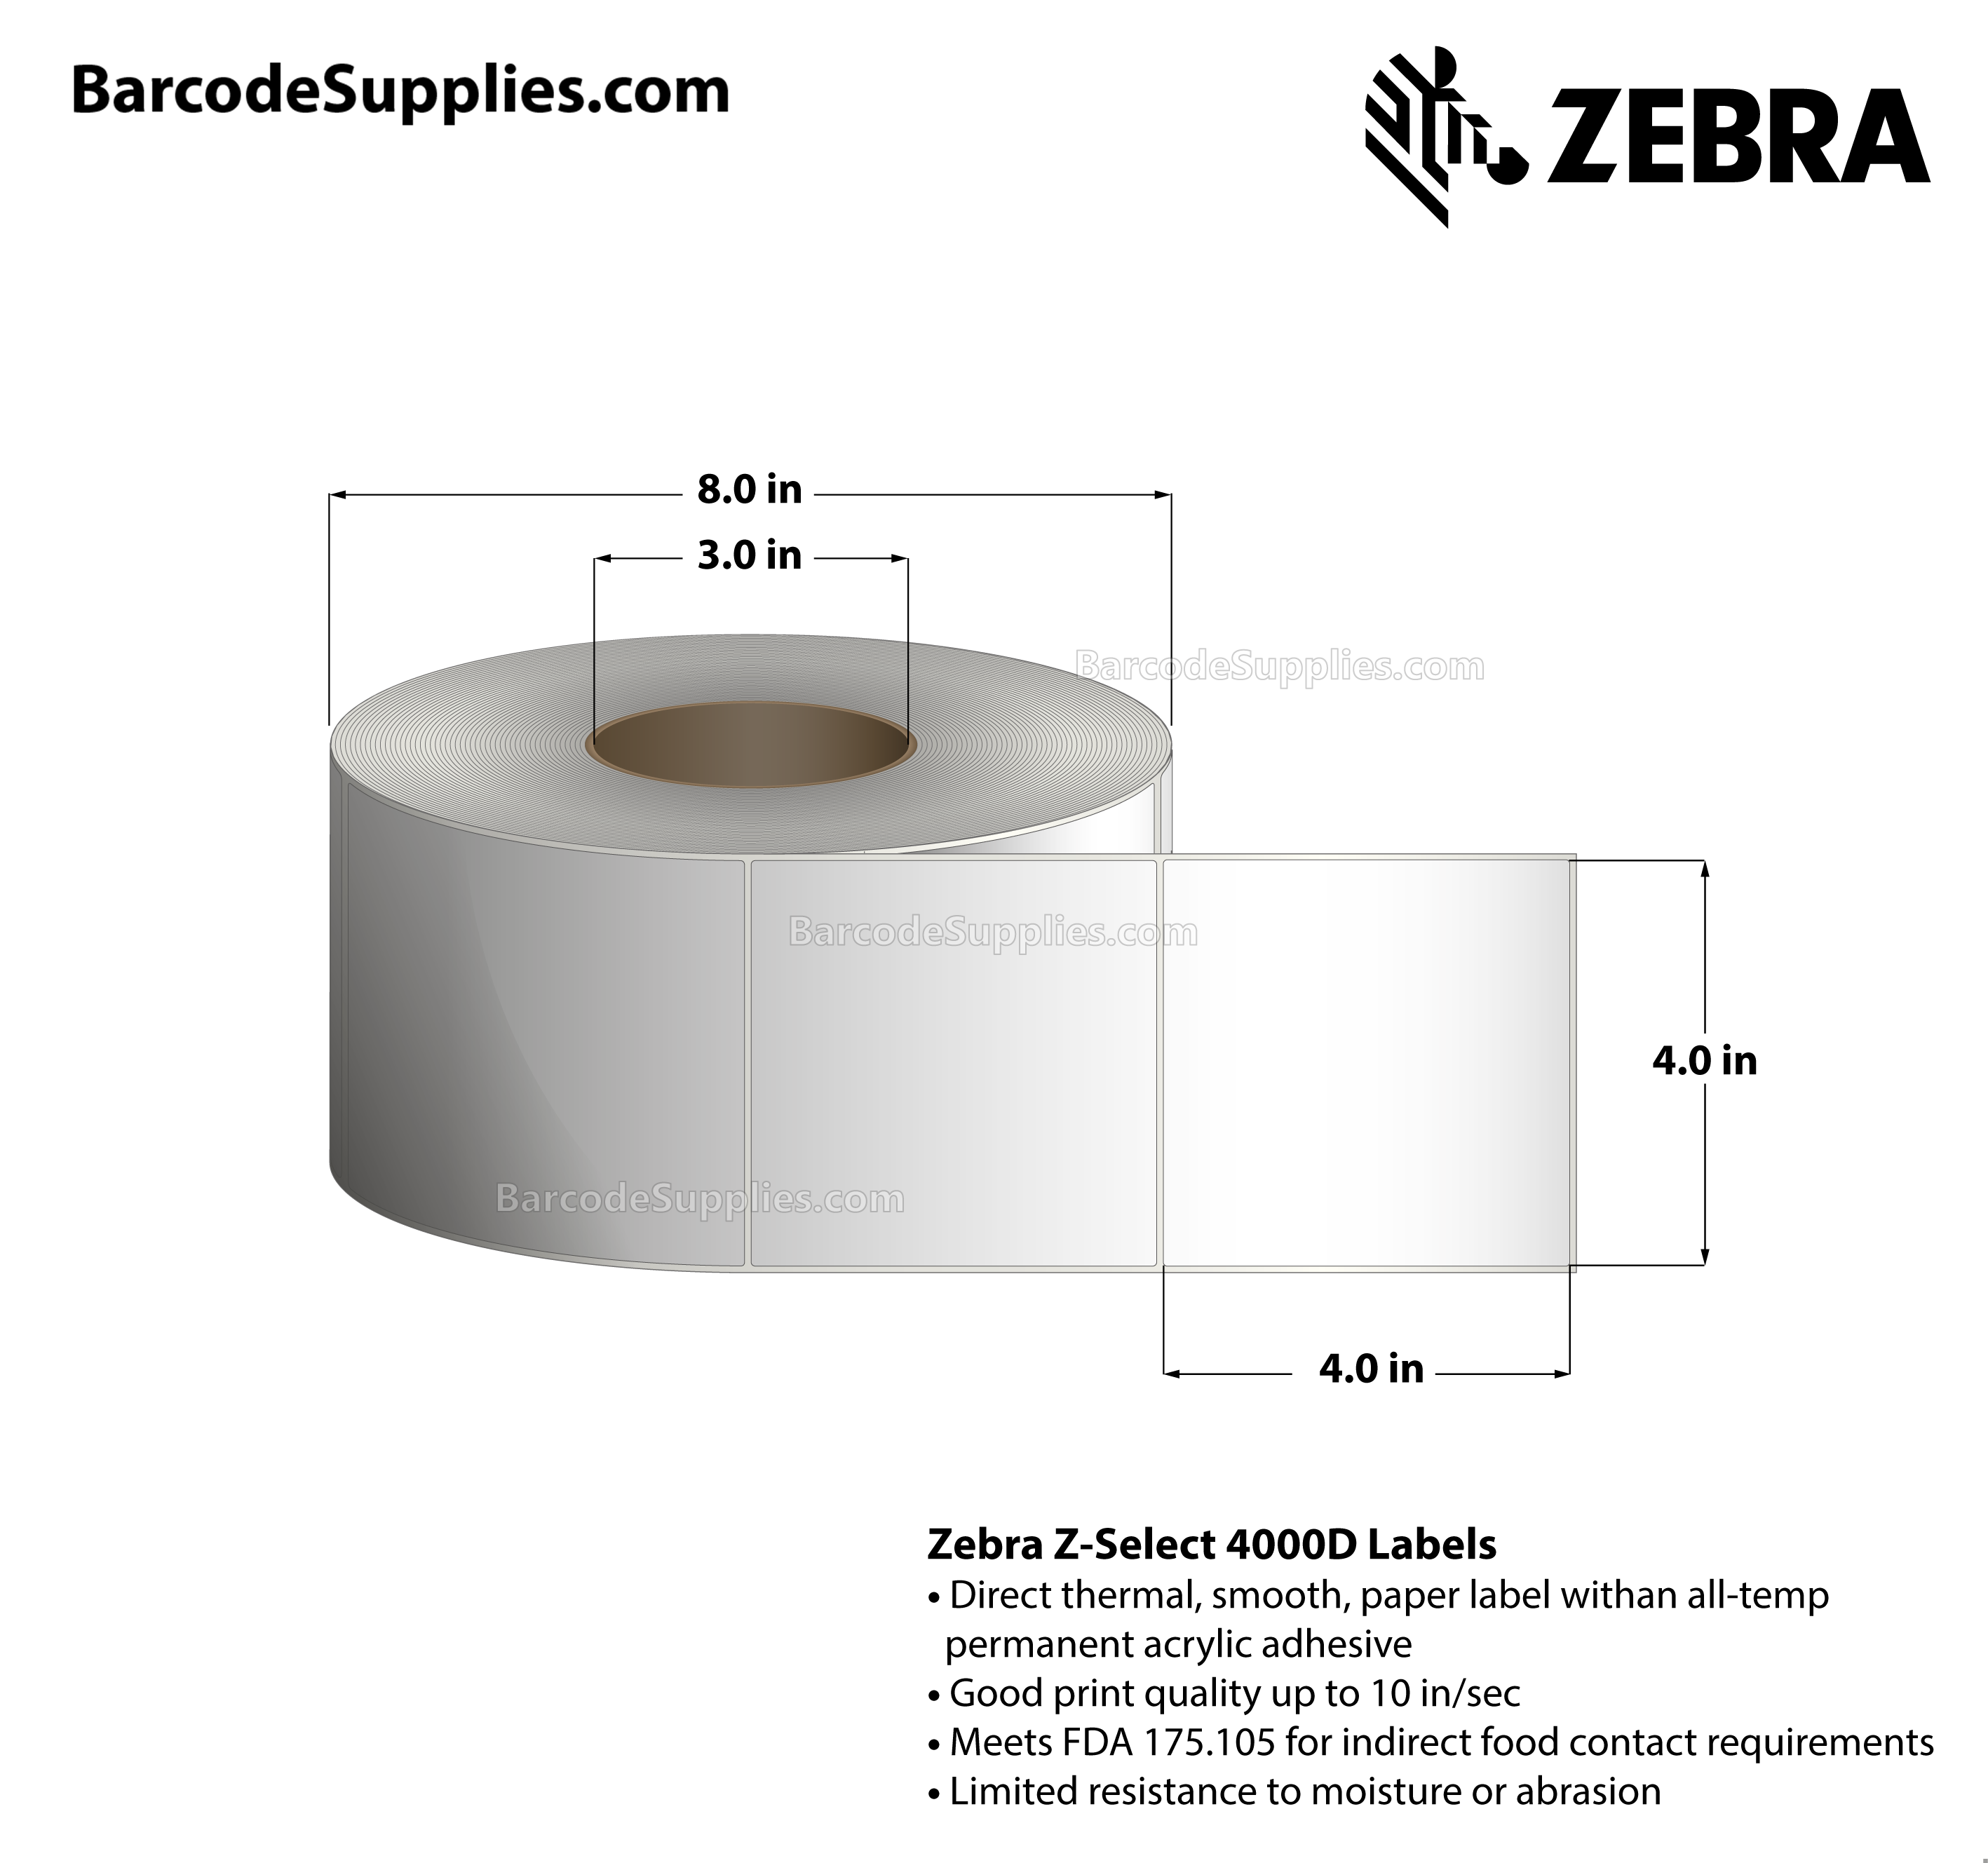 4 x 4 Direct Thermal White Z-Select 4000D Labels With All-Temp Adhesive - Not Perforated - 1400 Labels Per Roll - Carton Of 4 Rolls - 5600 Labels Total - MPN: 82801